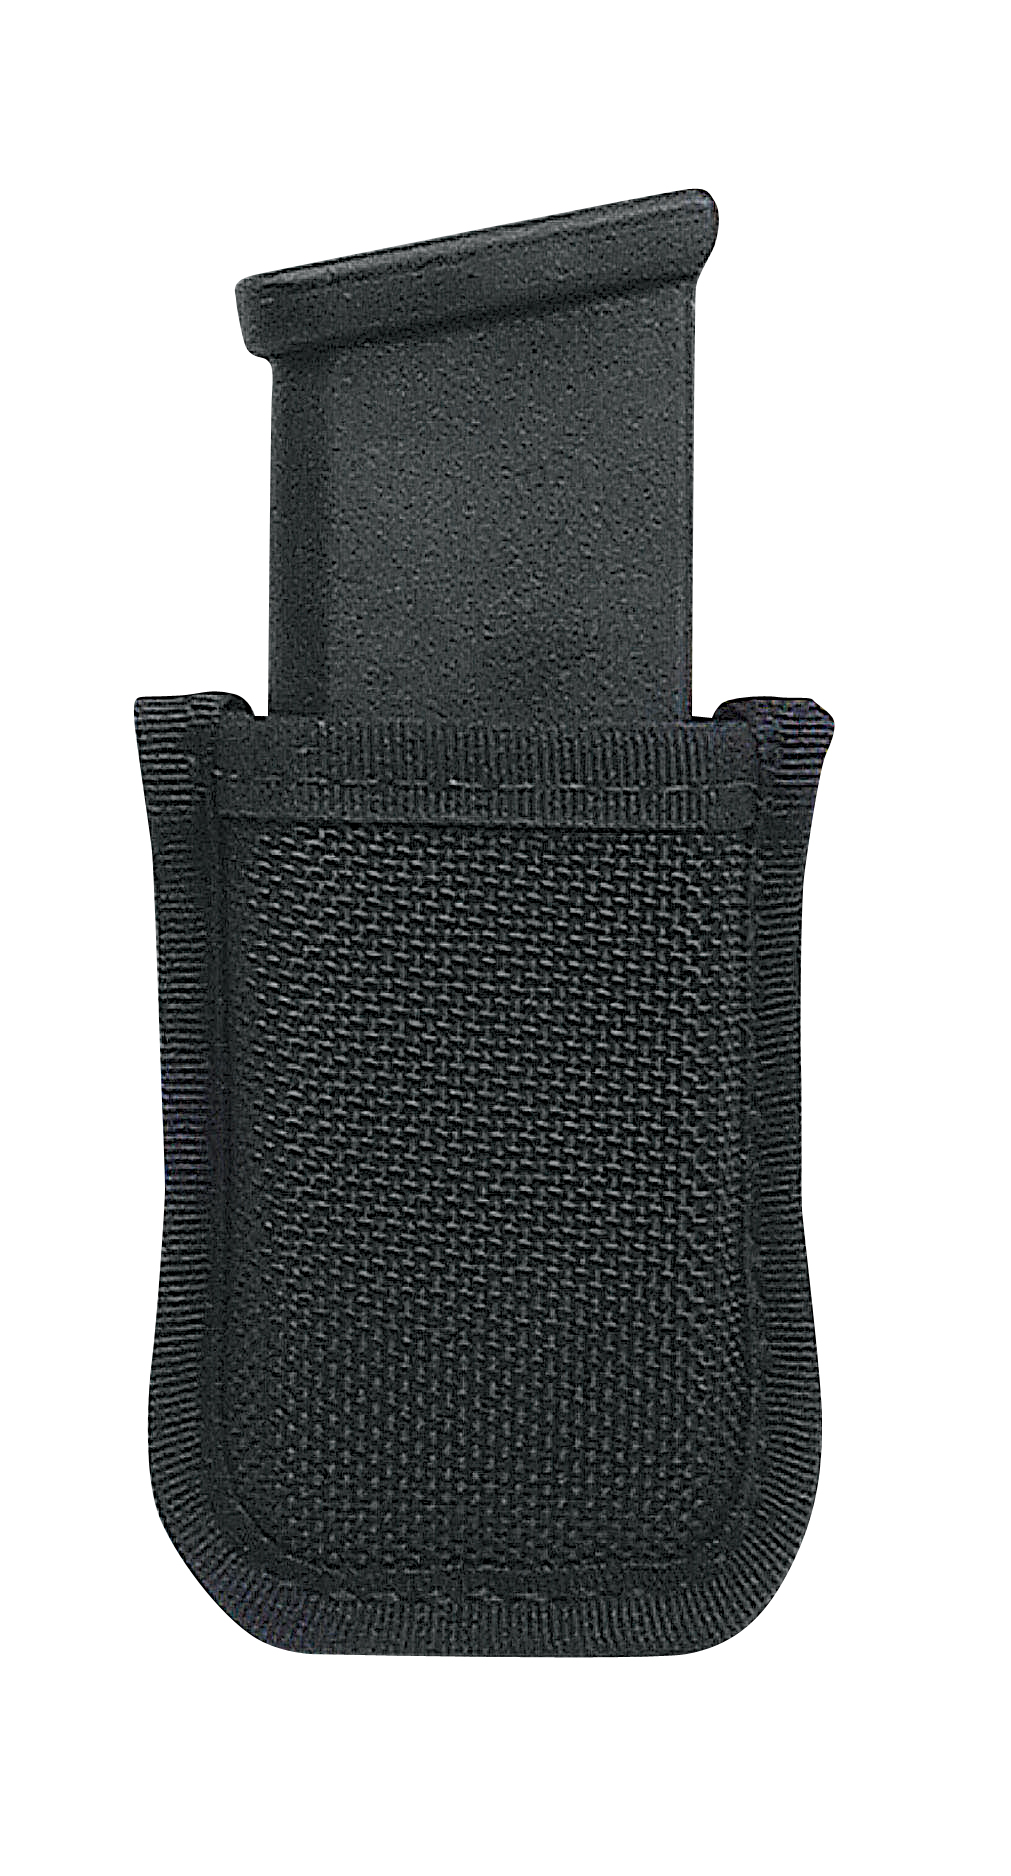 ND417-SINGLE MAGAZINE HOLDER WITH CLIP